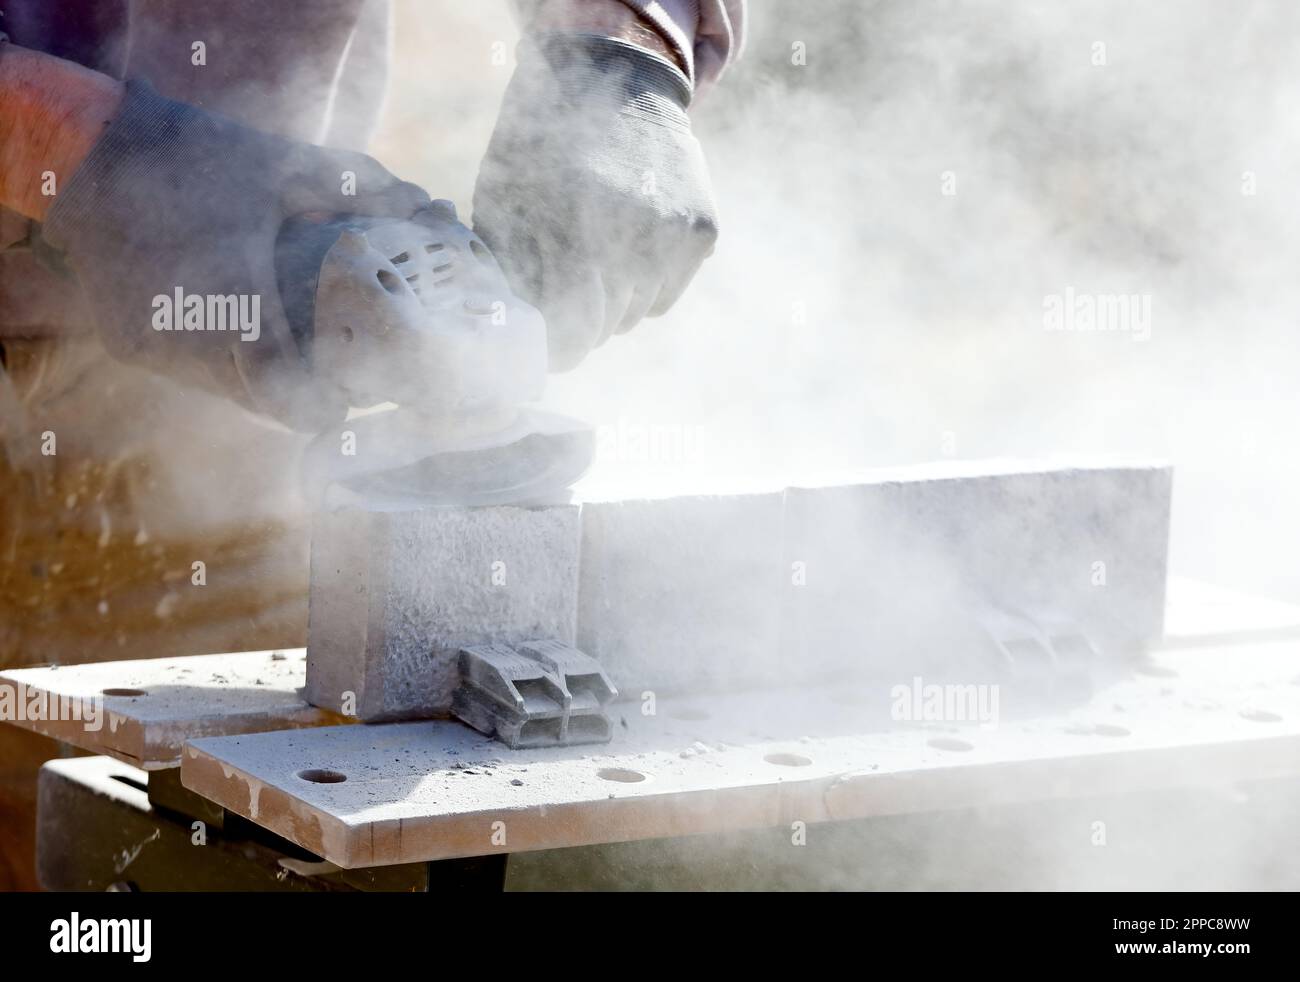 A man cutting concrete balk with a lot of dust in the air Stock Photo